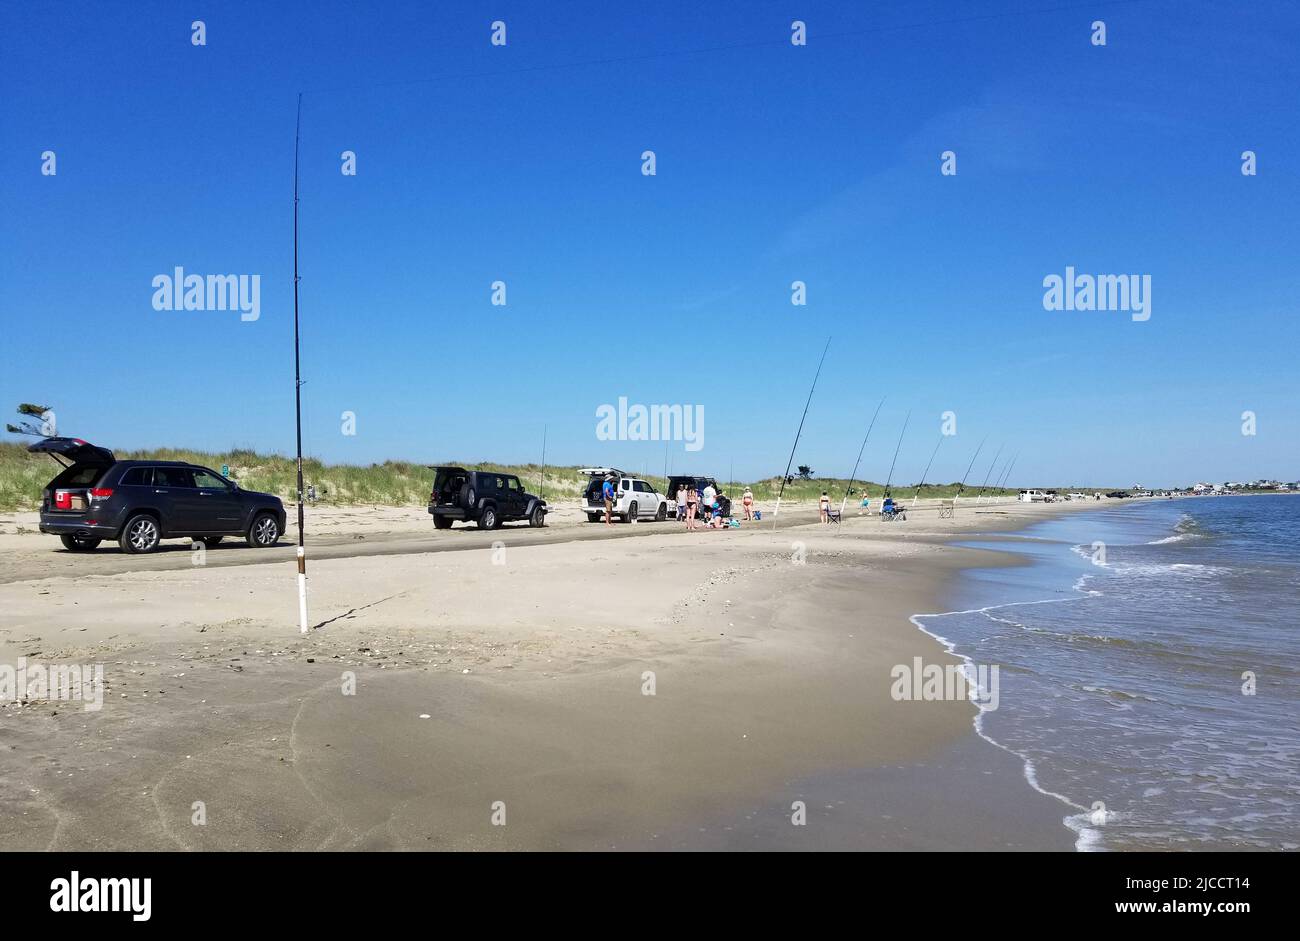 Broadkill Beach, Delaware, U.S.A - May 16, 2022 - Trucks and cars parked on the beach overlooking the surfishing rods Stock Photo